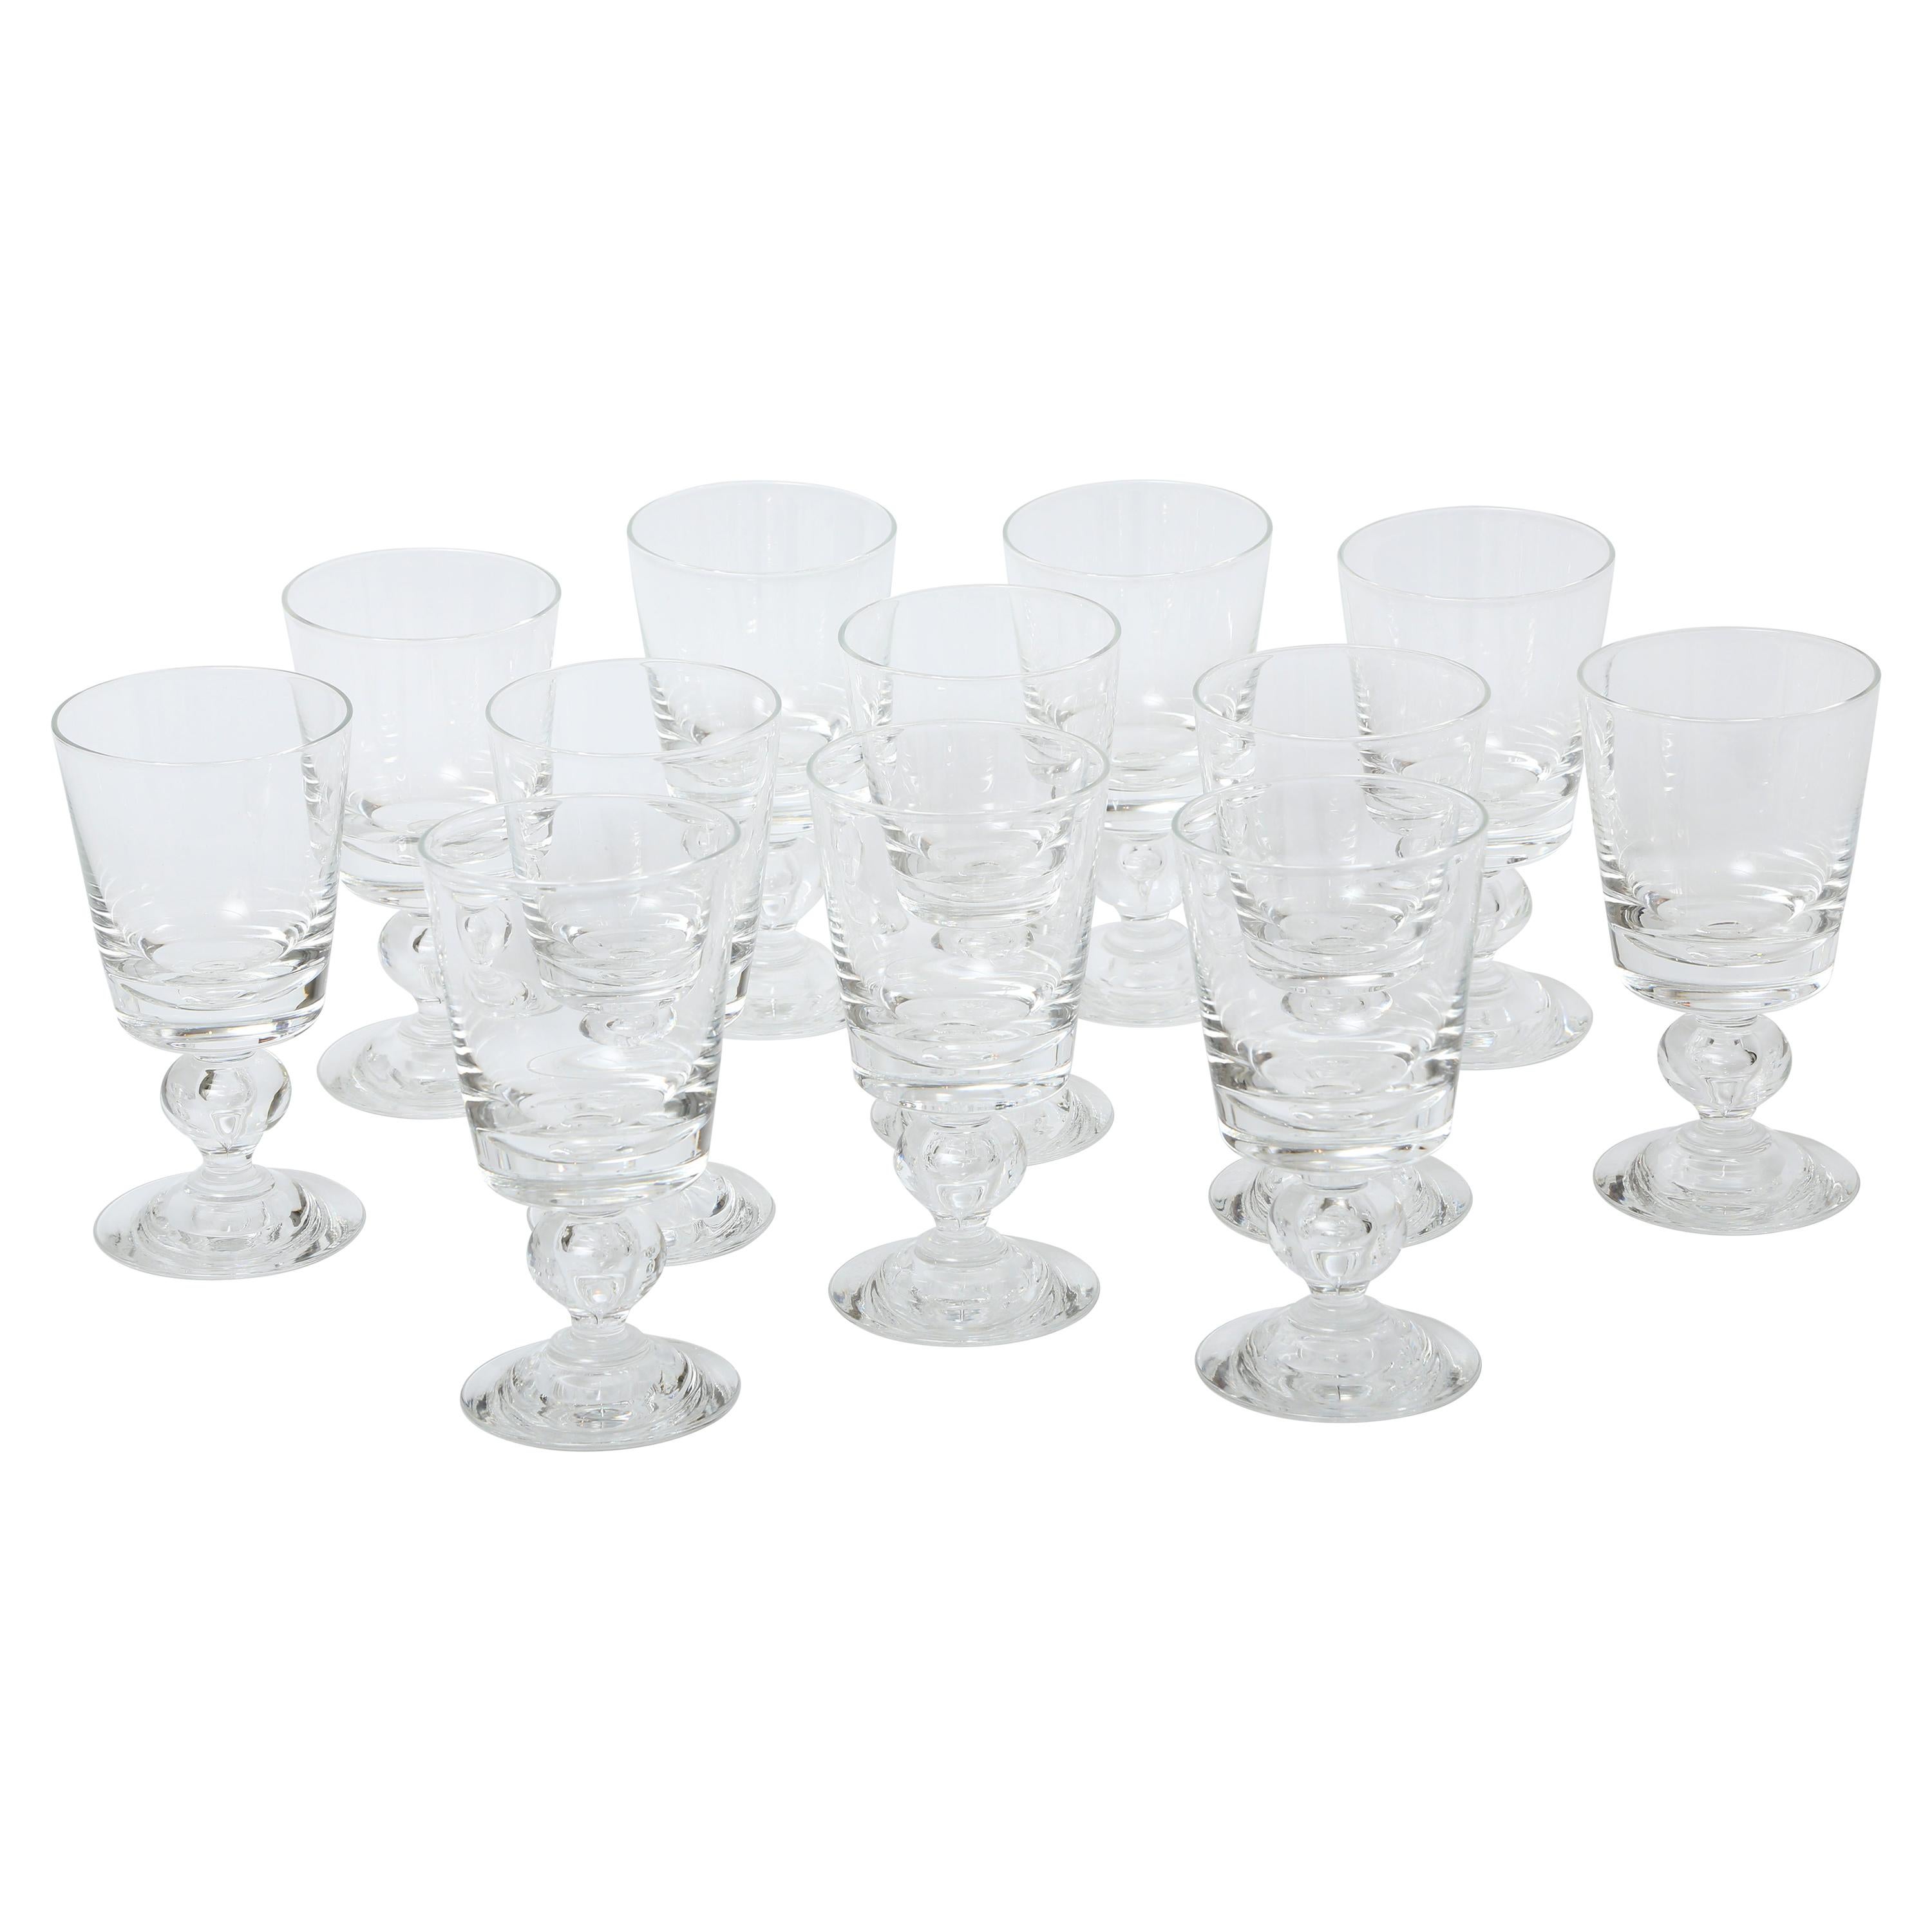 12 Steuben Goblets, Tall Heavy with Blown Teardrop Stem, Excellent Clear Crystal